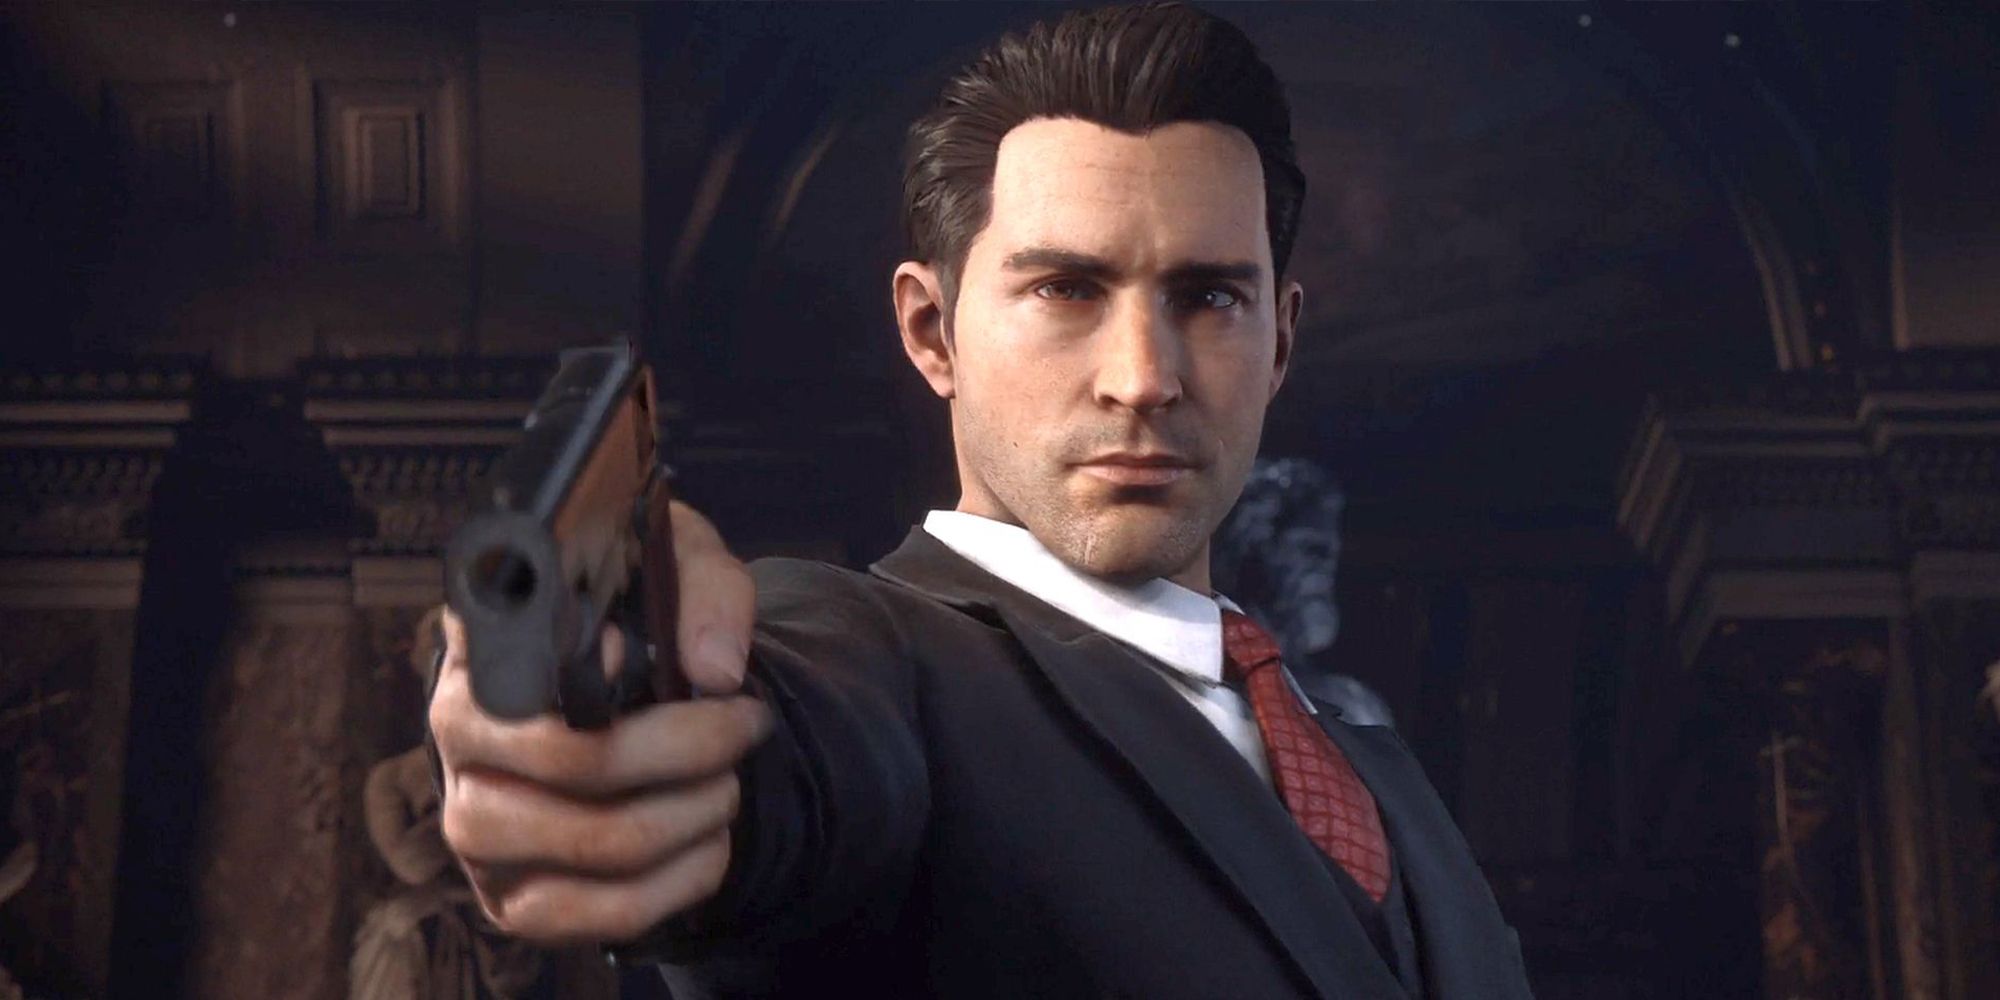 Tommy Angelo in a suit aiming his gun in Mafia: Definitive Edition.